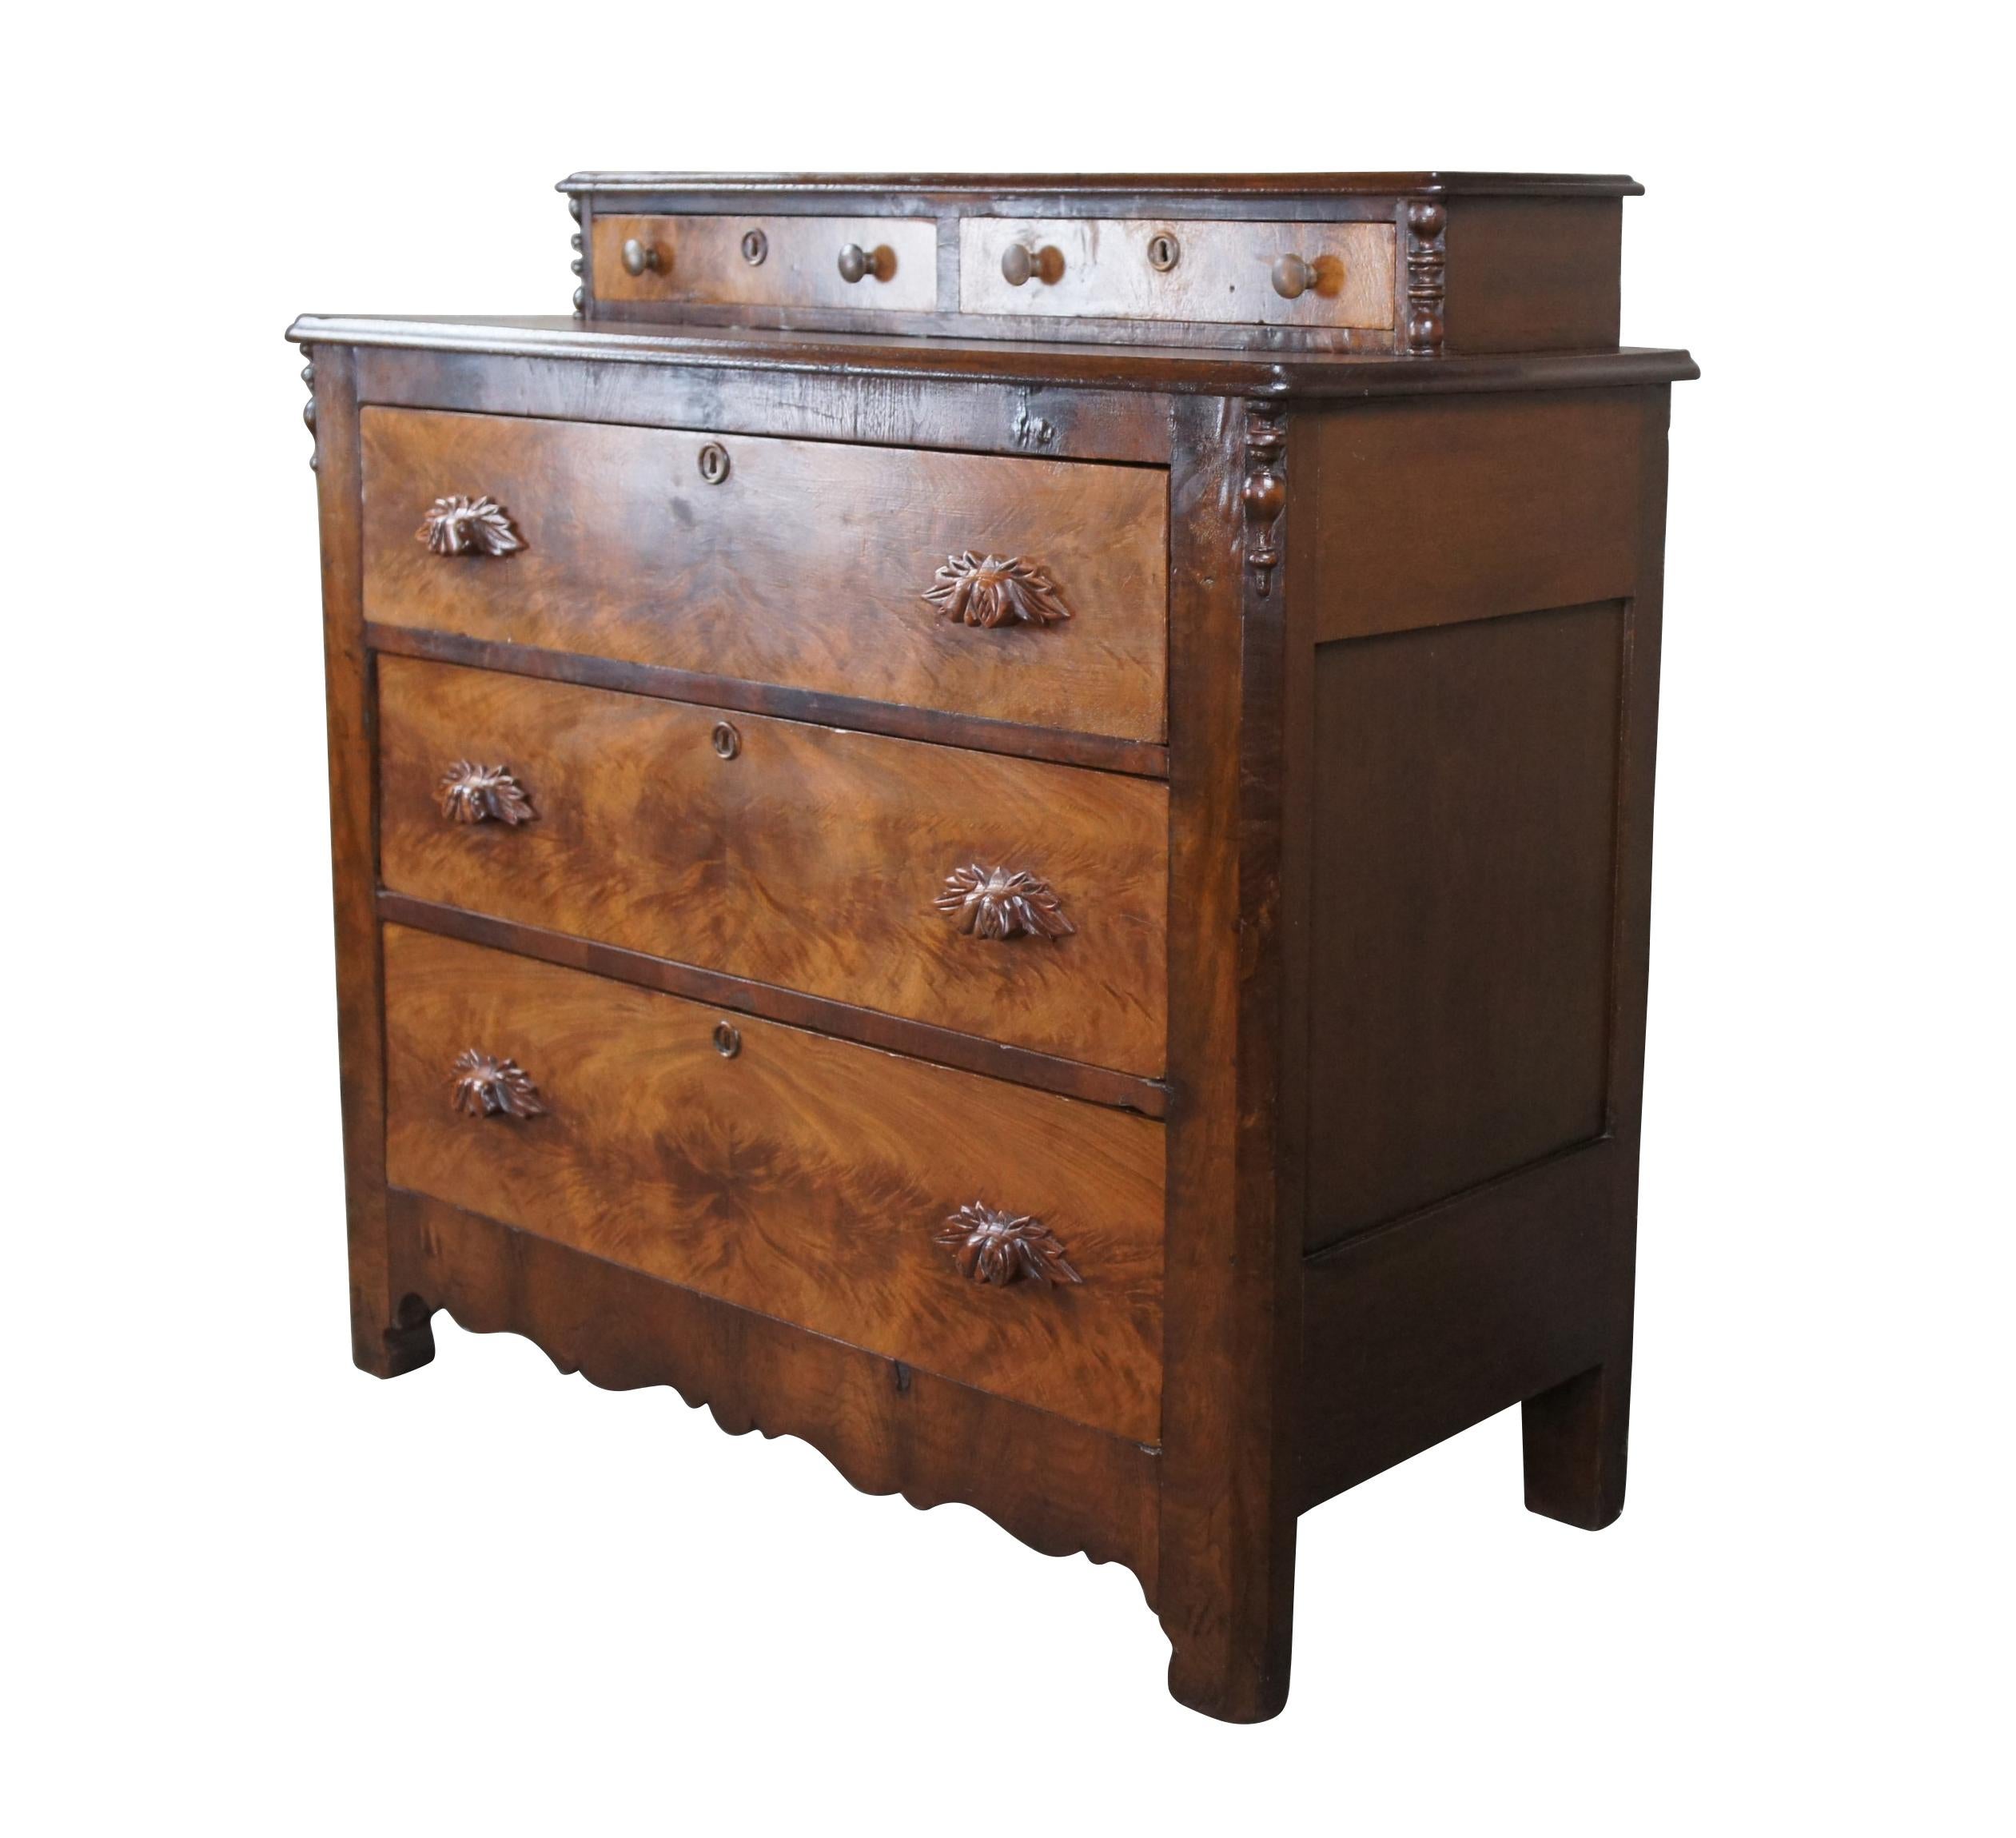 A beautiful antique American Victorian era stepback dresser, circa 1870s.  Made from poplar and walnut with three hand dovetailed standard drawers below two upper glovebox drawers.  Features crotch walnut veneer along drawer fronts, hand carved